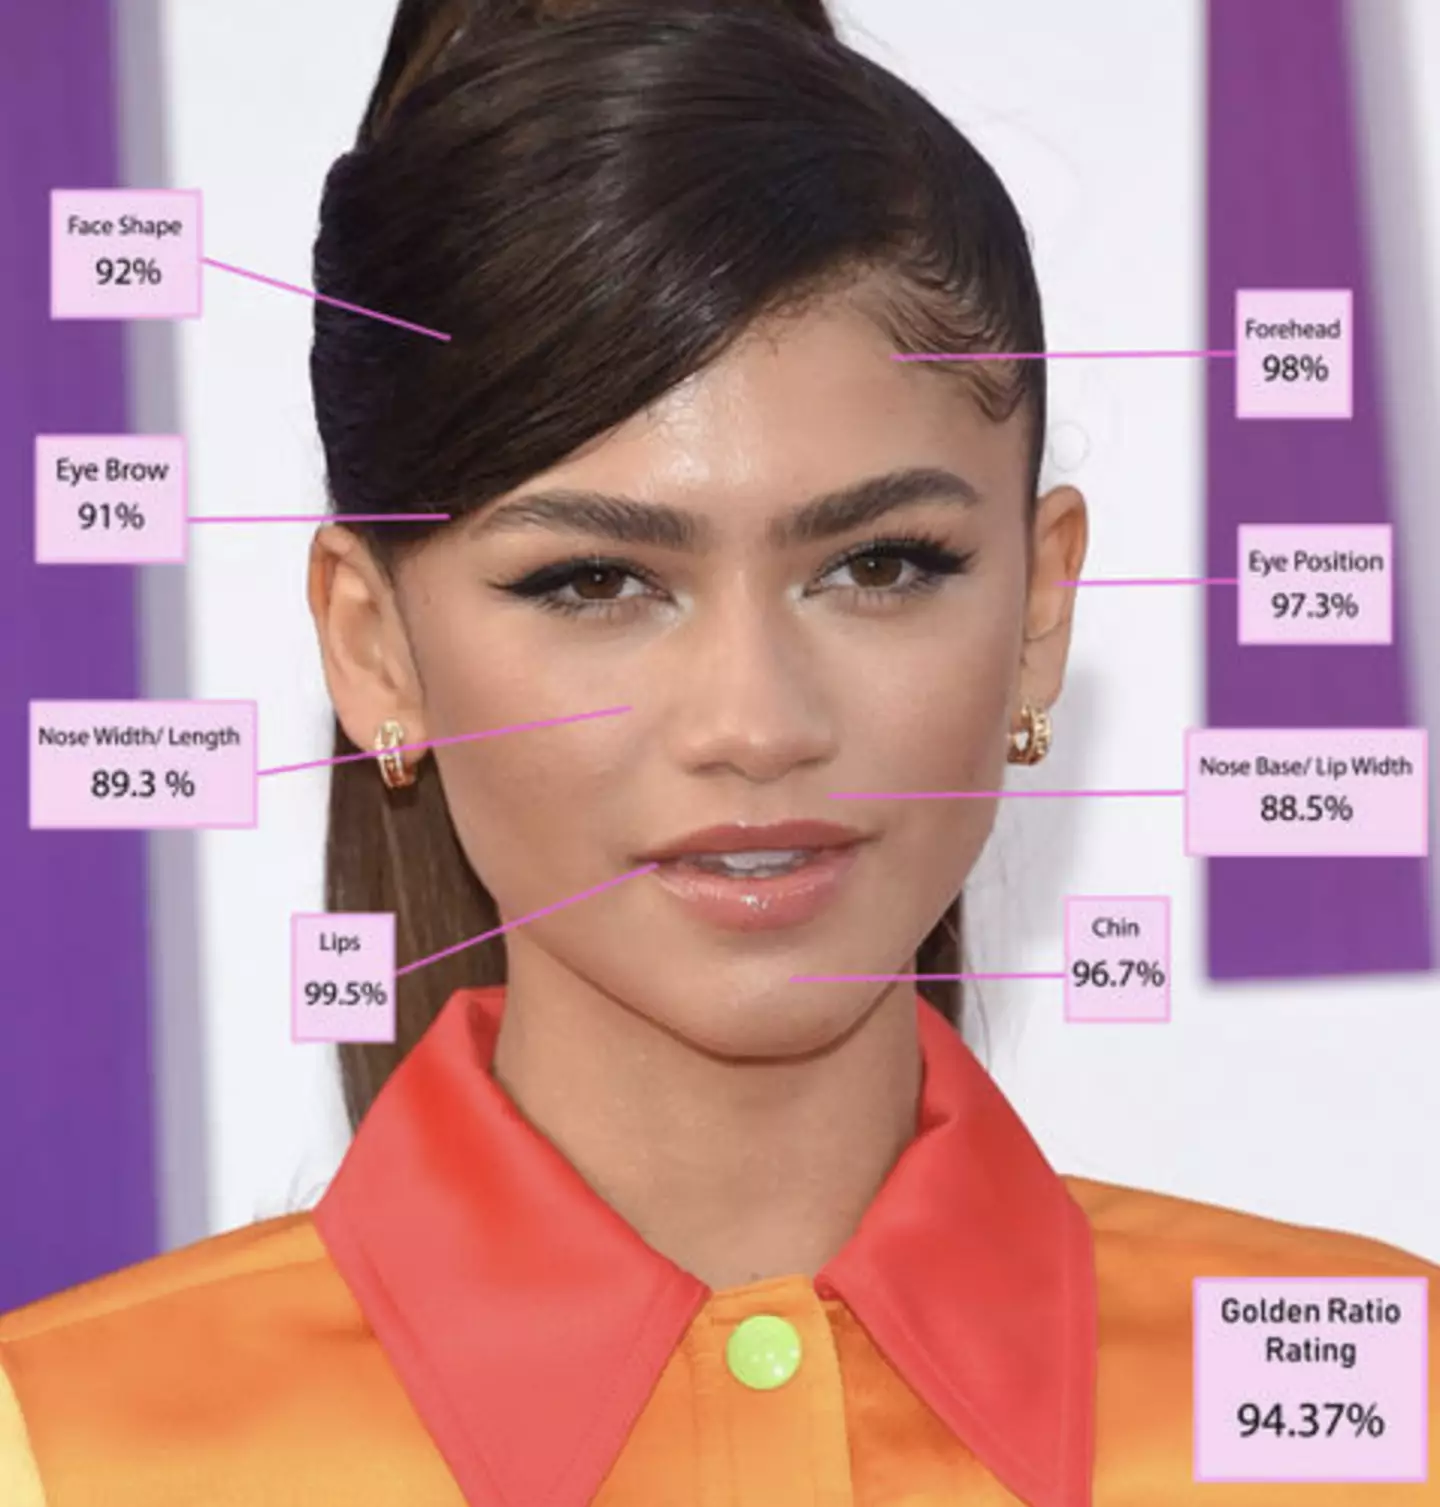 Zendaya came in second place with 94.37 percent.